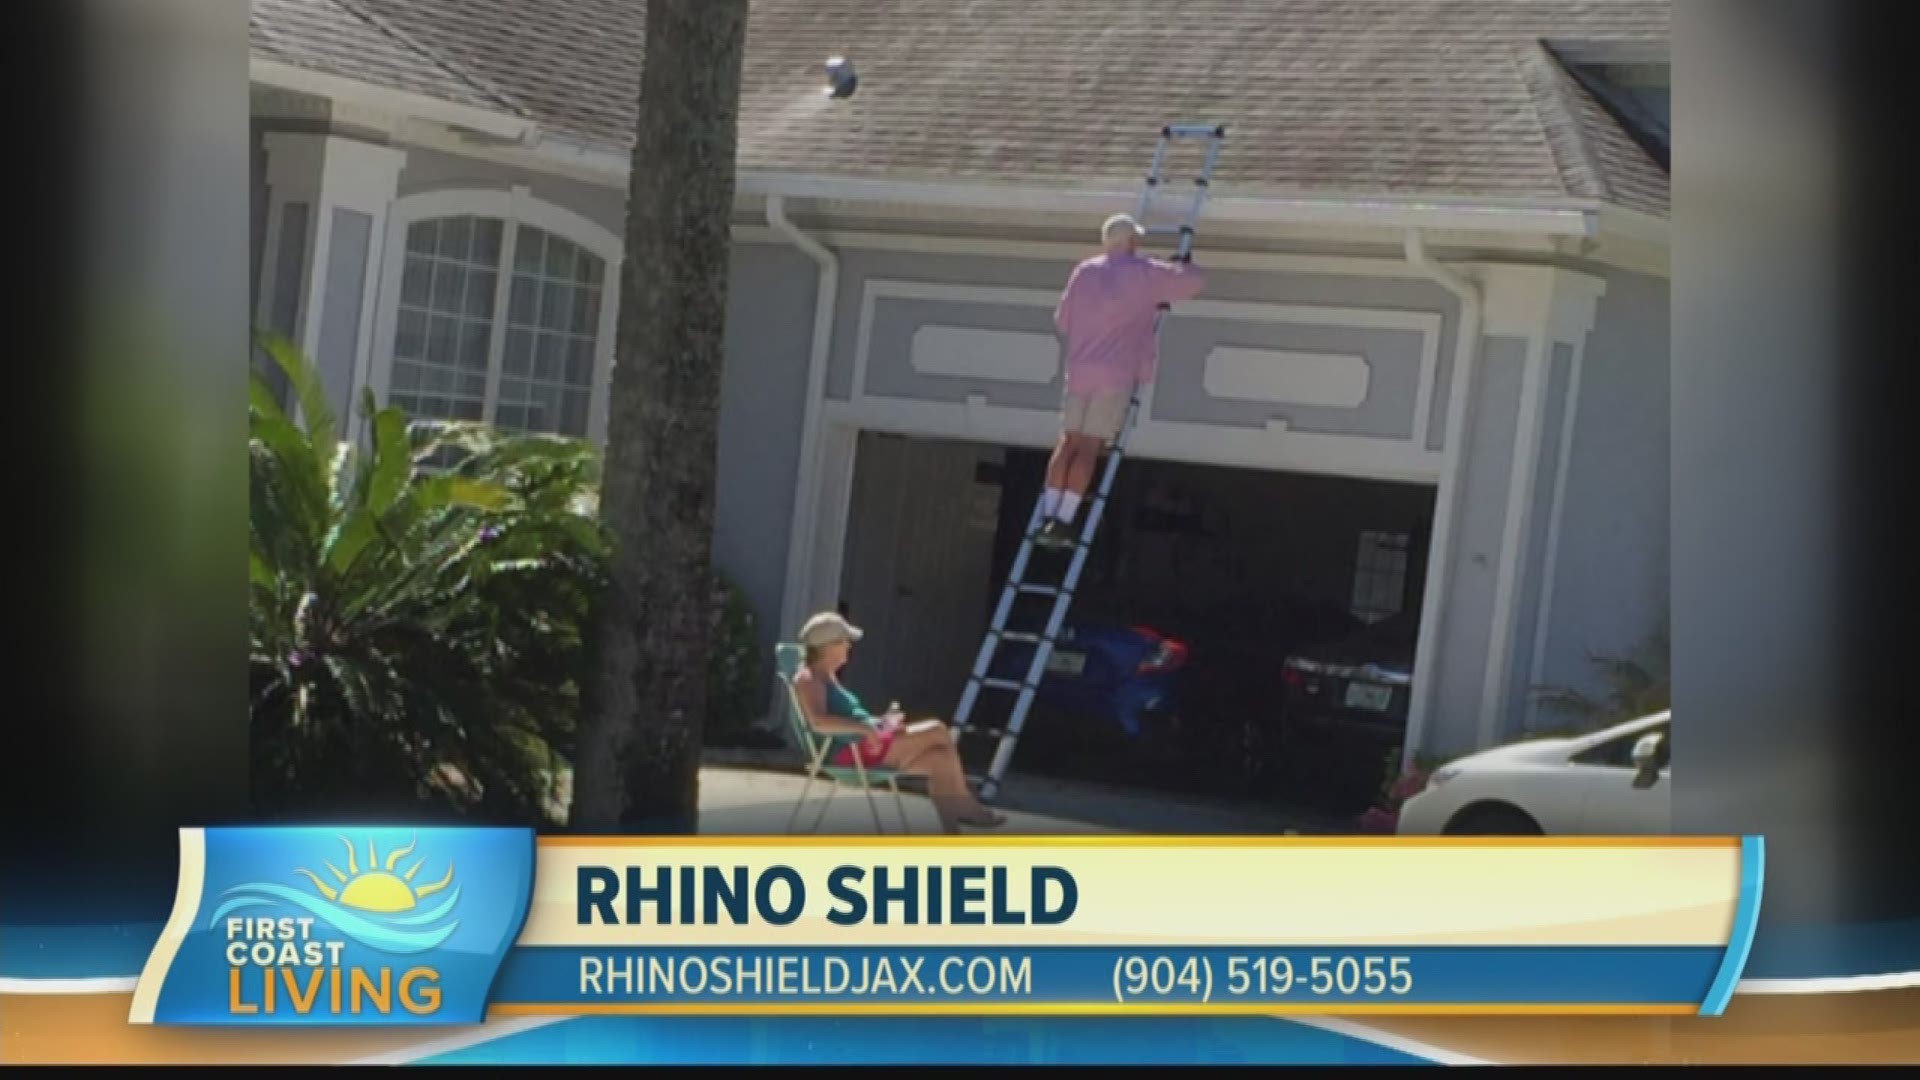 Give your Valentine the gift of a beautiful home. Rhino Shield owner Jay Mariano stops by to tell us how they can help.